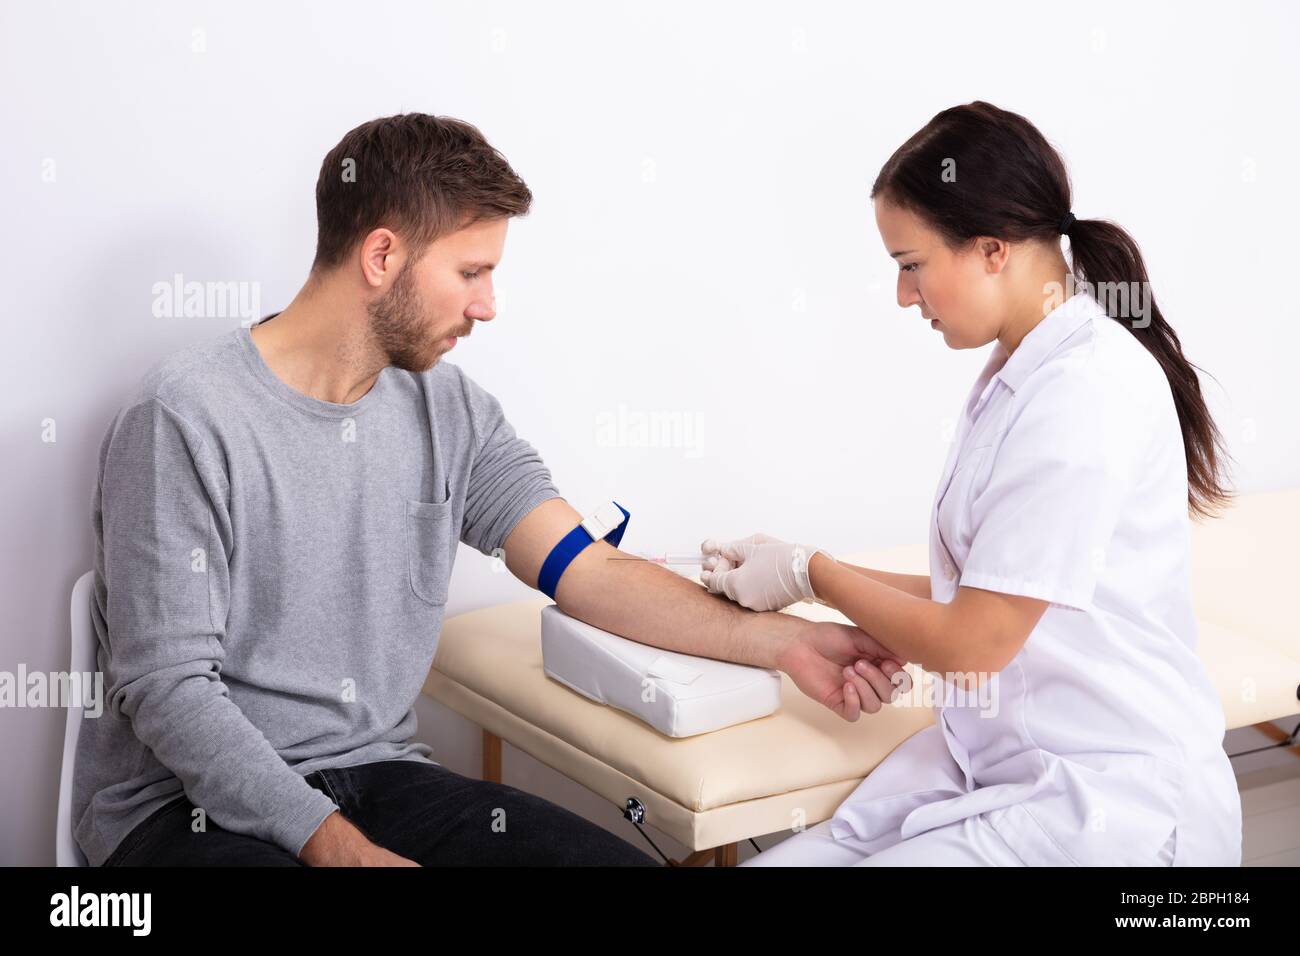 Young Female Doctor Injecting Male Patient With Syringe To Collect Blood Sample In Clinic Stock Photo